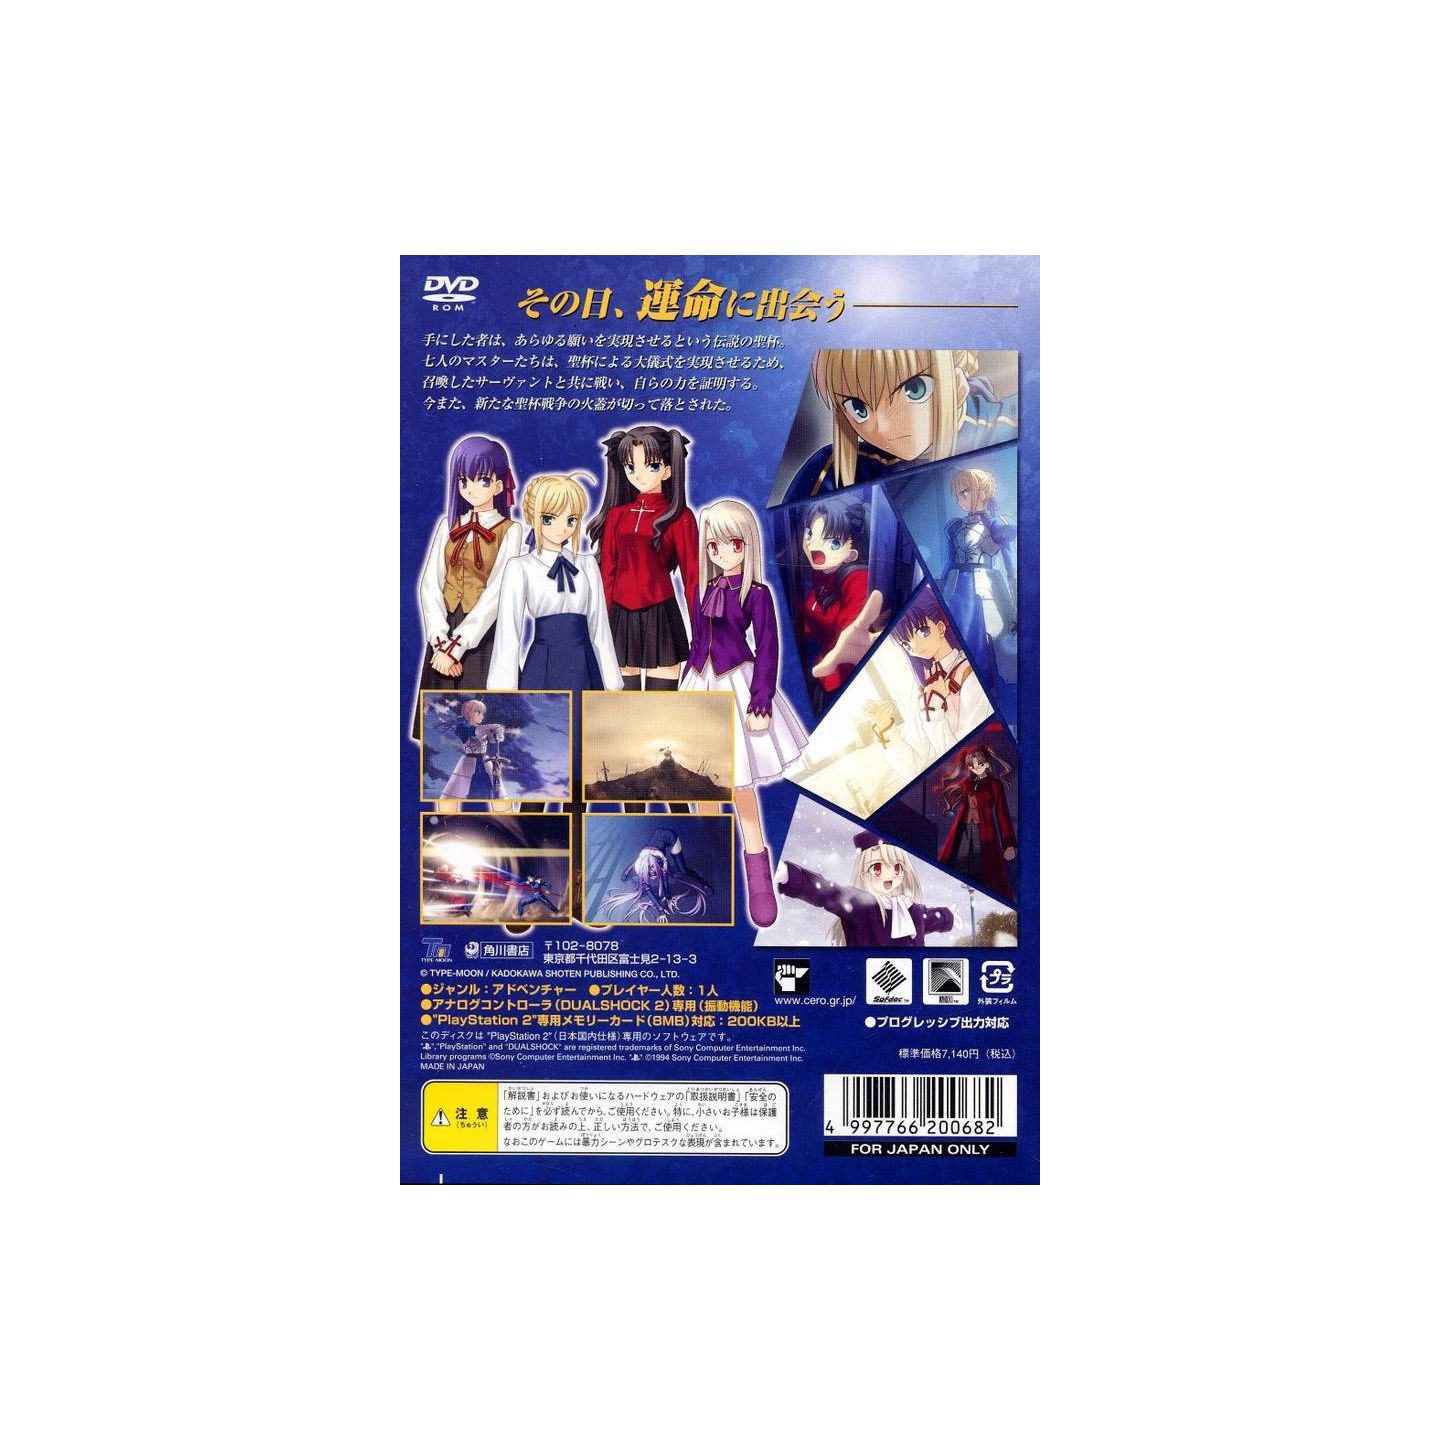 Fate Stay Night Realta Nua PS2 [Japan Import]